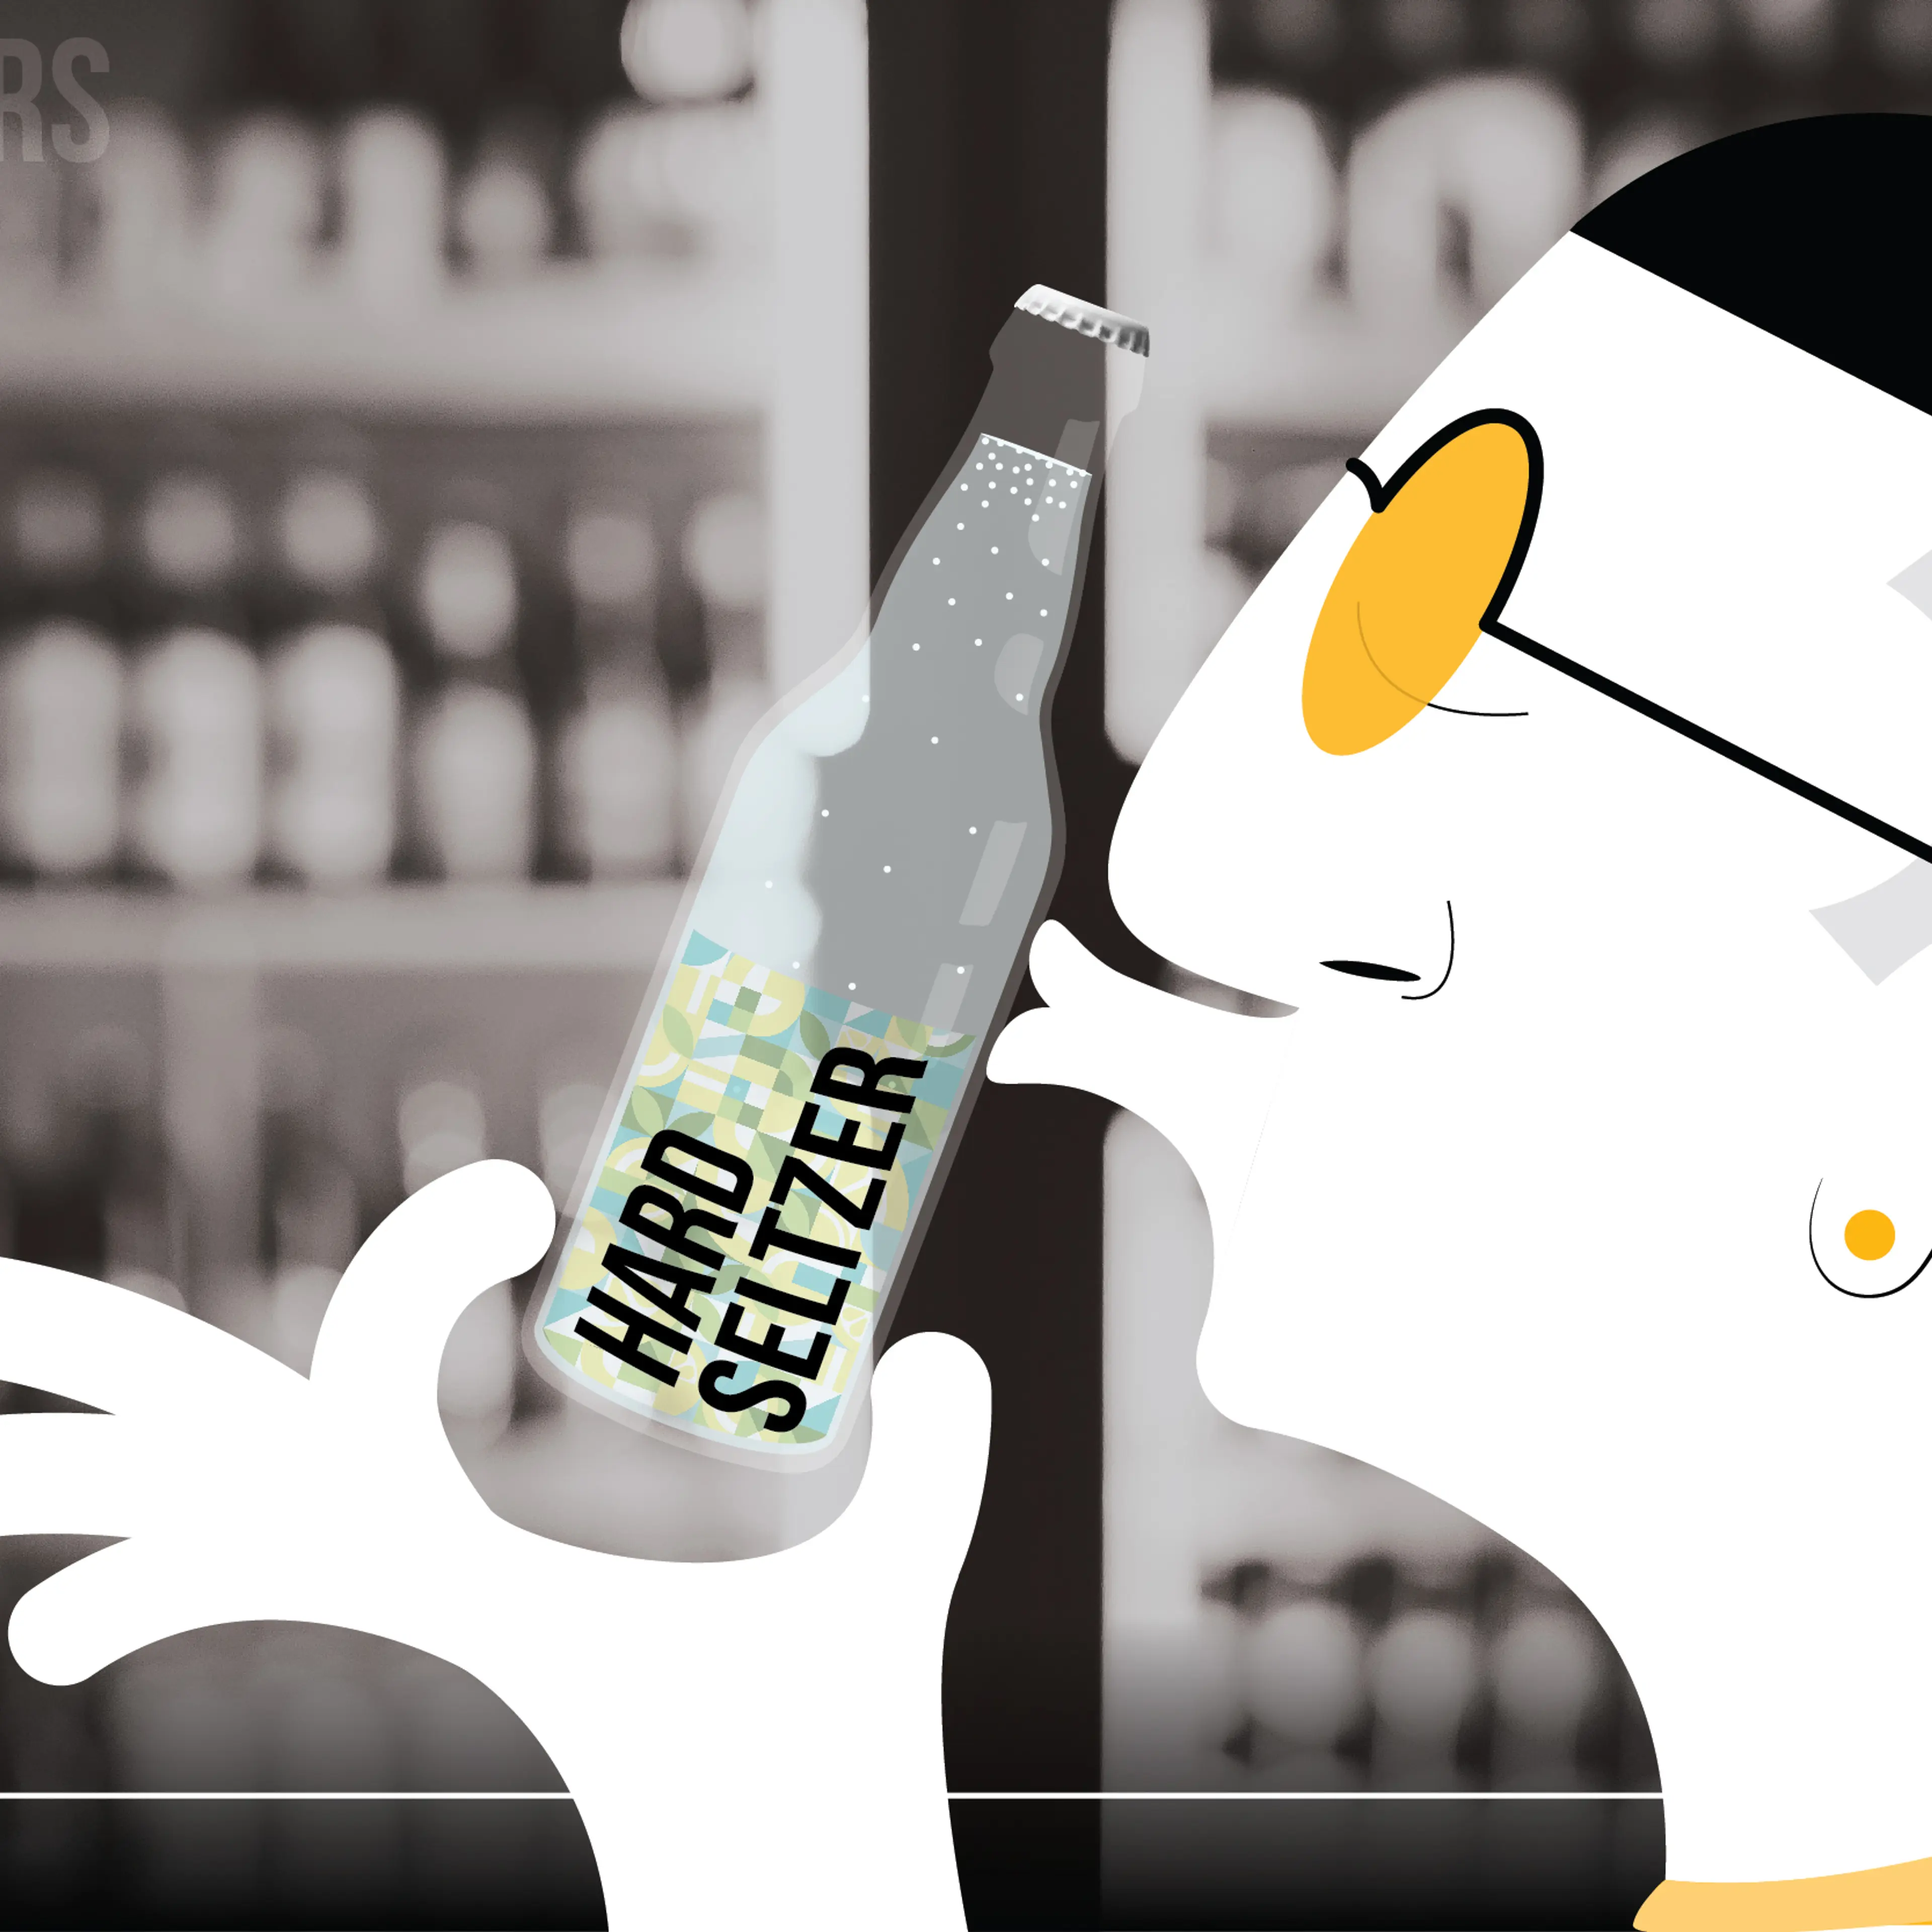 Seltzer: The new kid on the block competing with beer